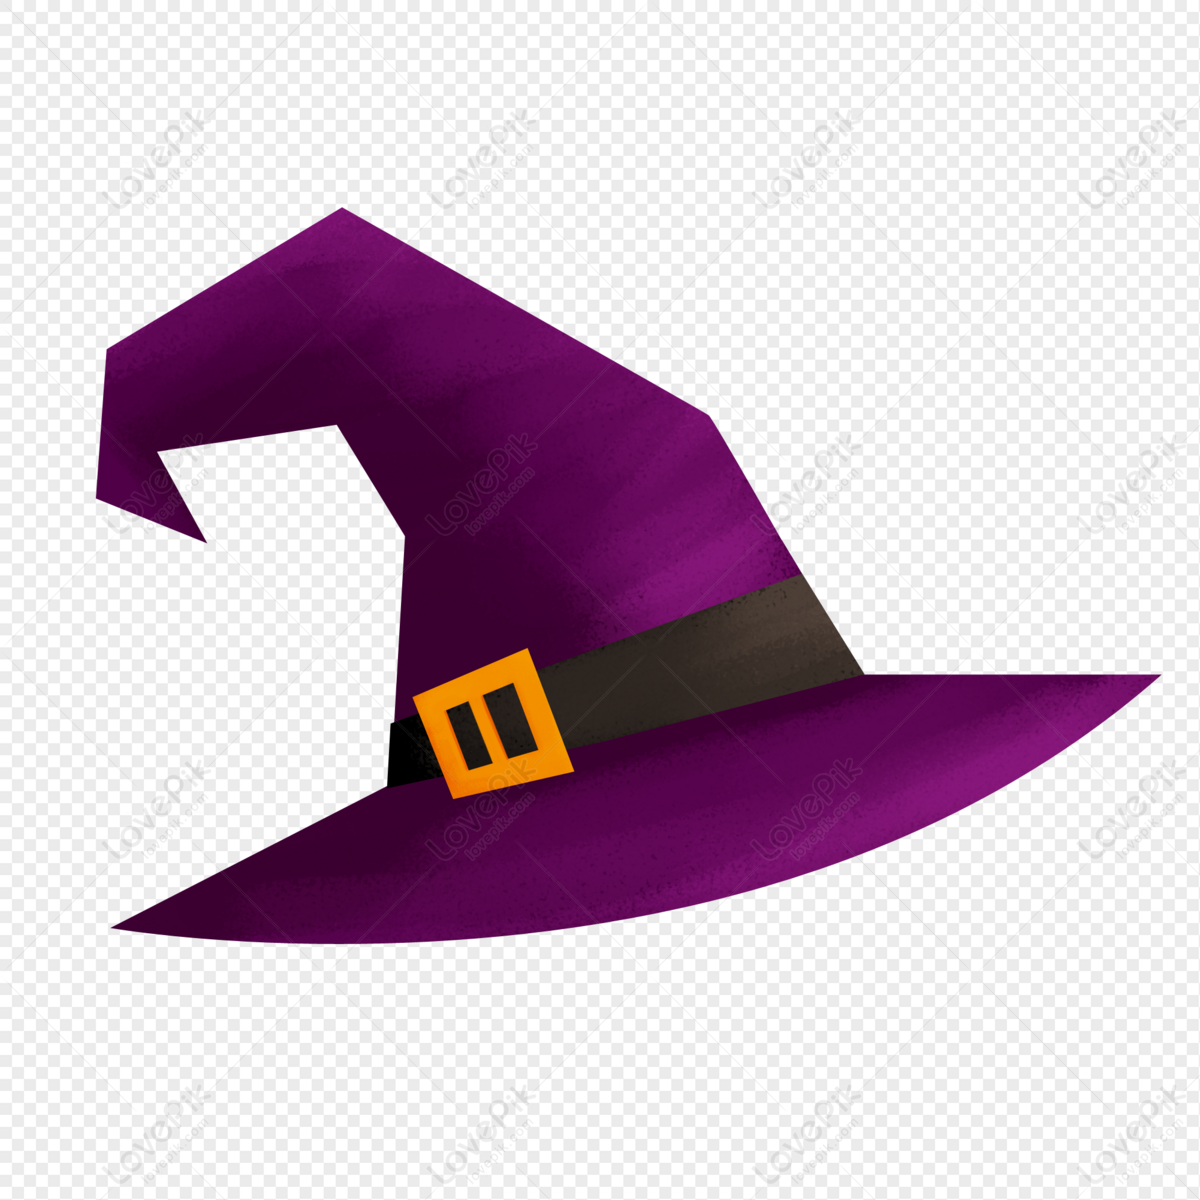 Witch Hat PNG White Transparent And Clipart Image For Free Download -  Lovepik | 401425032